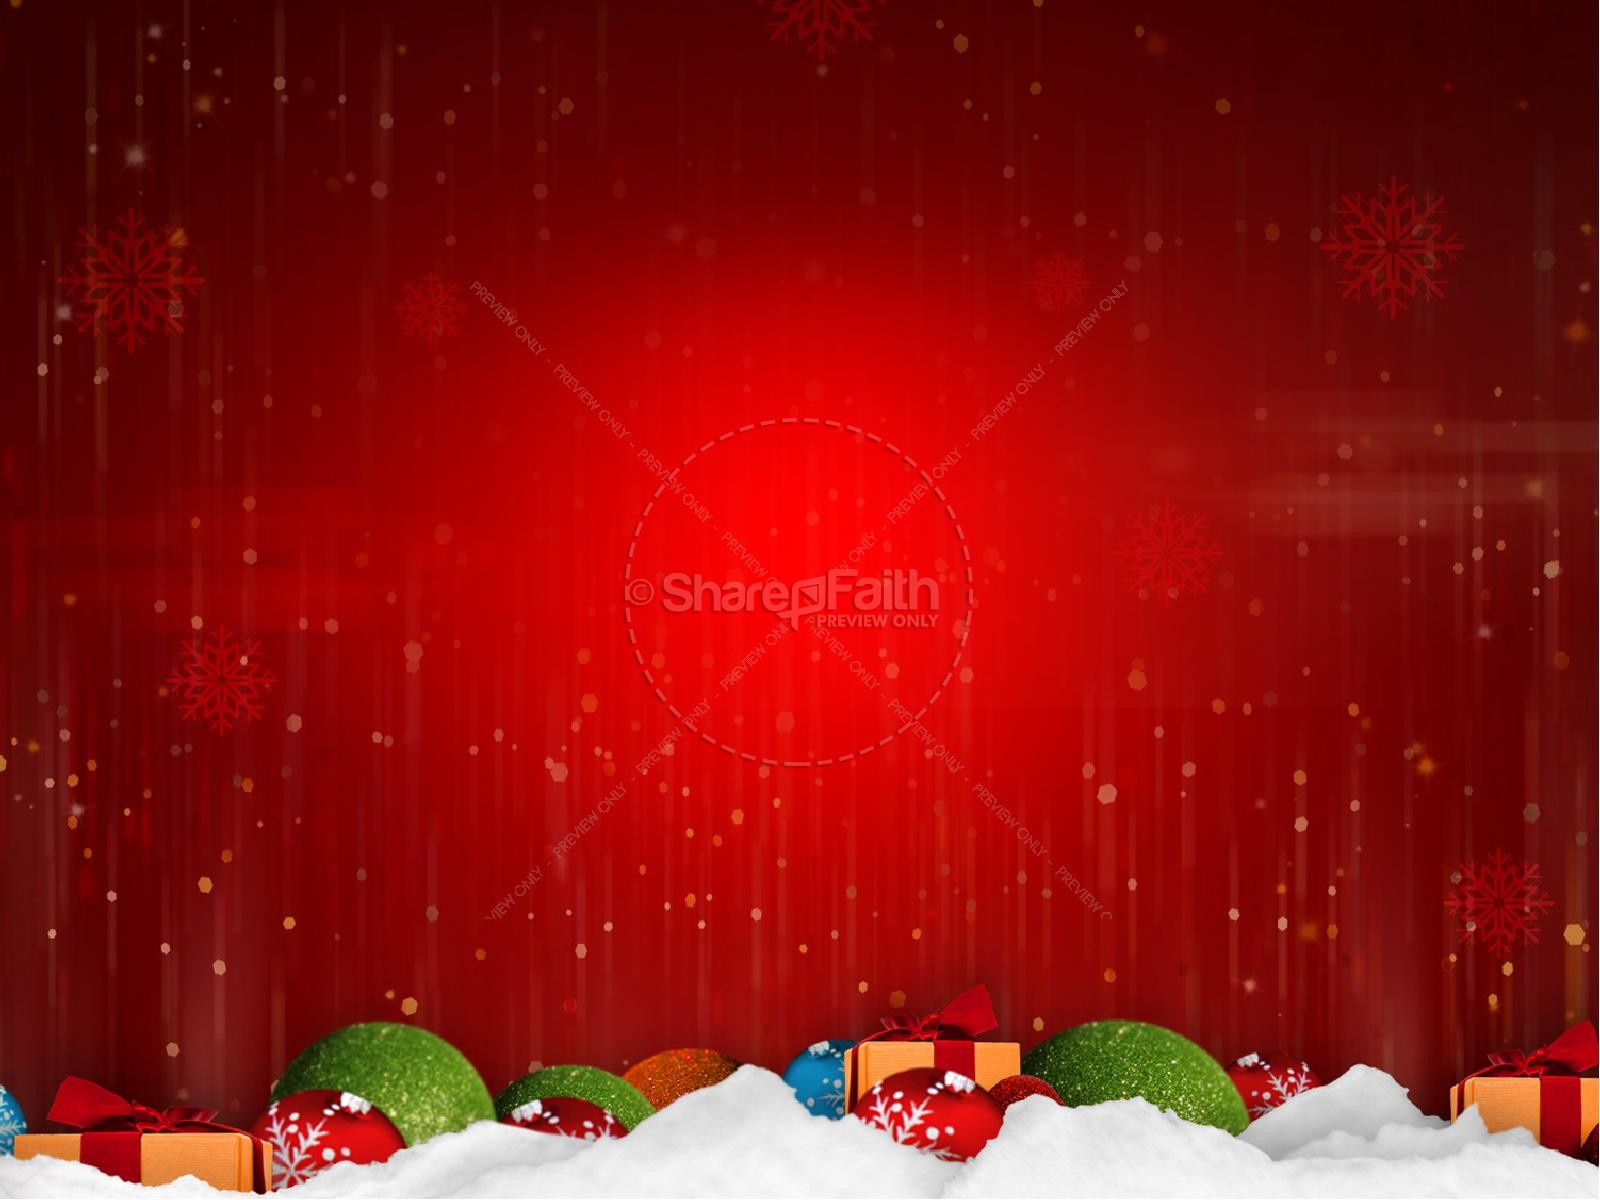 Merry Christmas Happy New Year Ministry PowerPoint Thumbnail 6